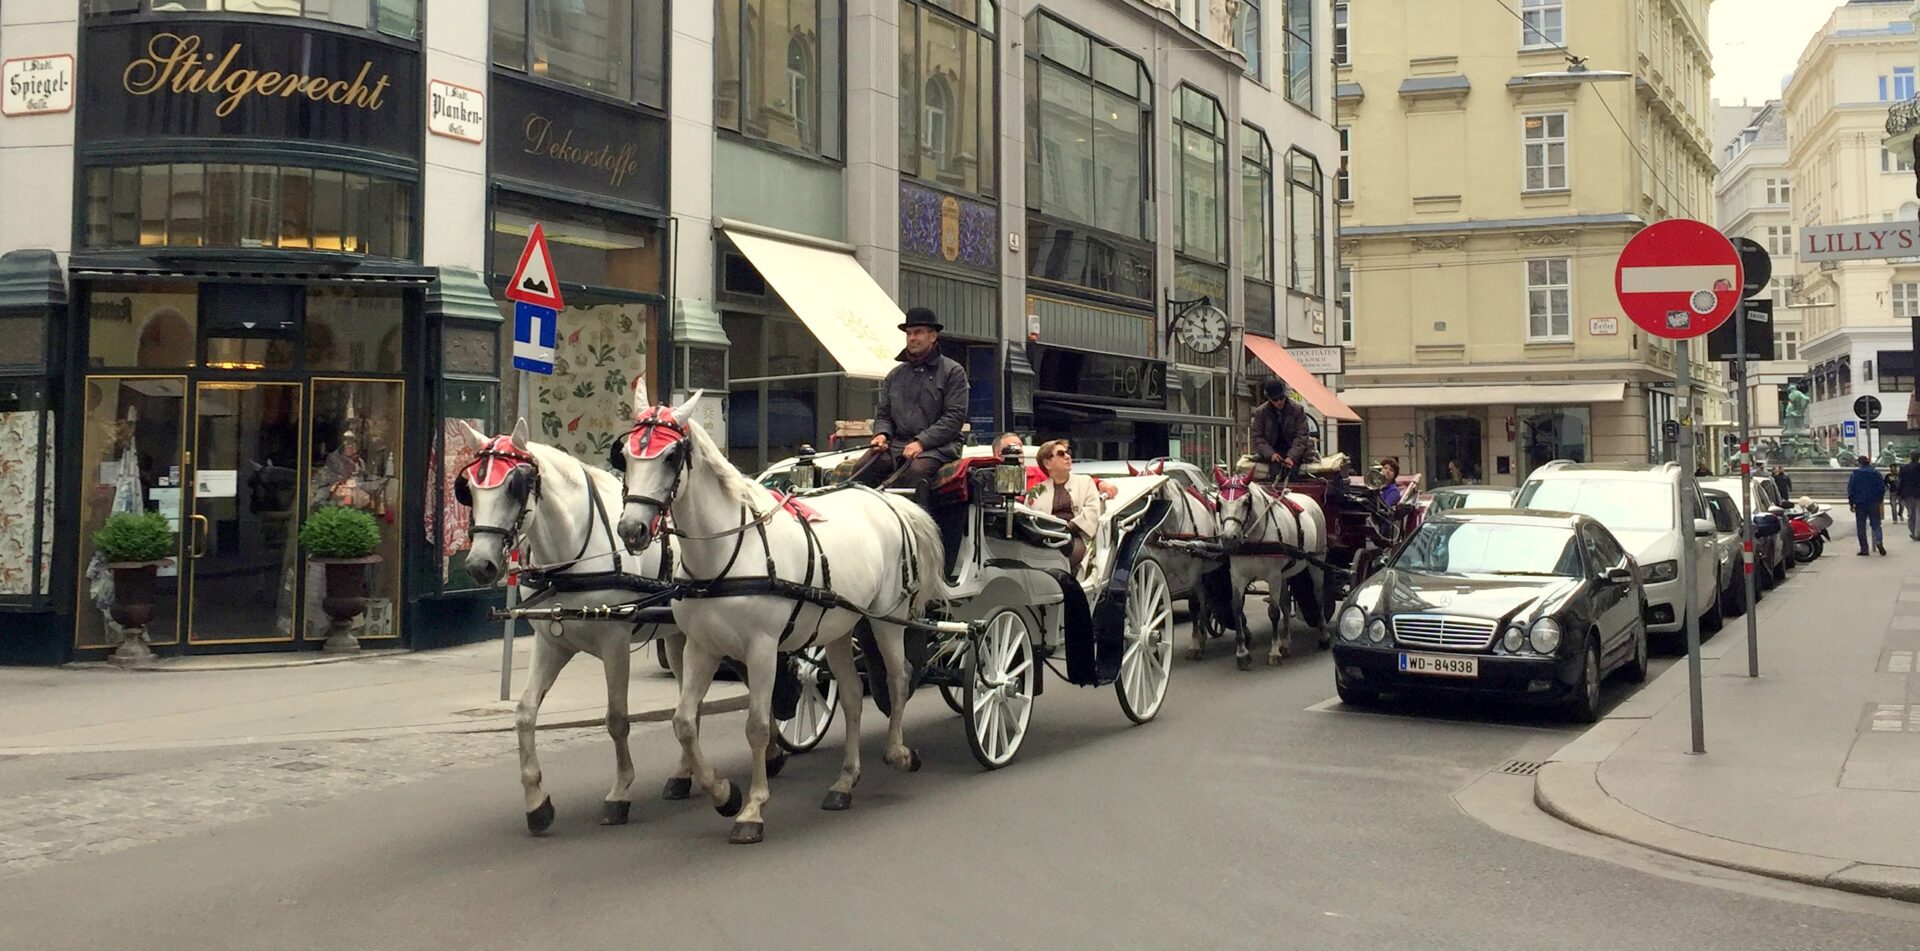 A white horse pulling a carriage down a city street.